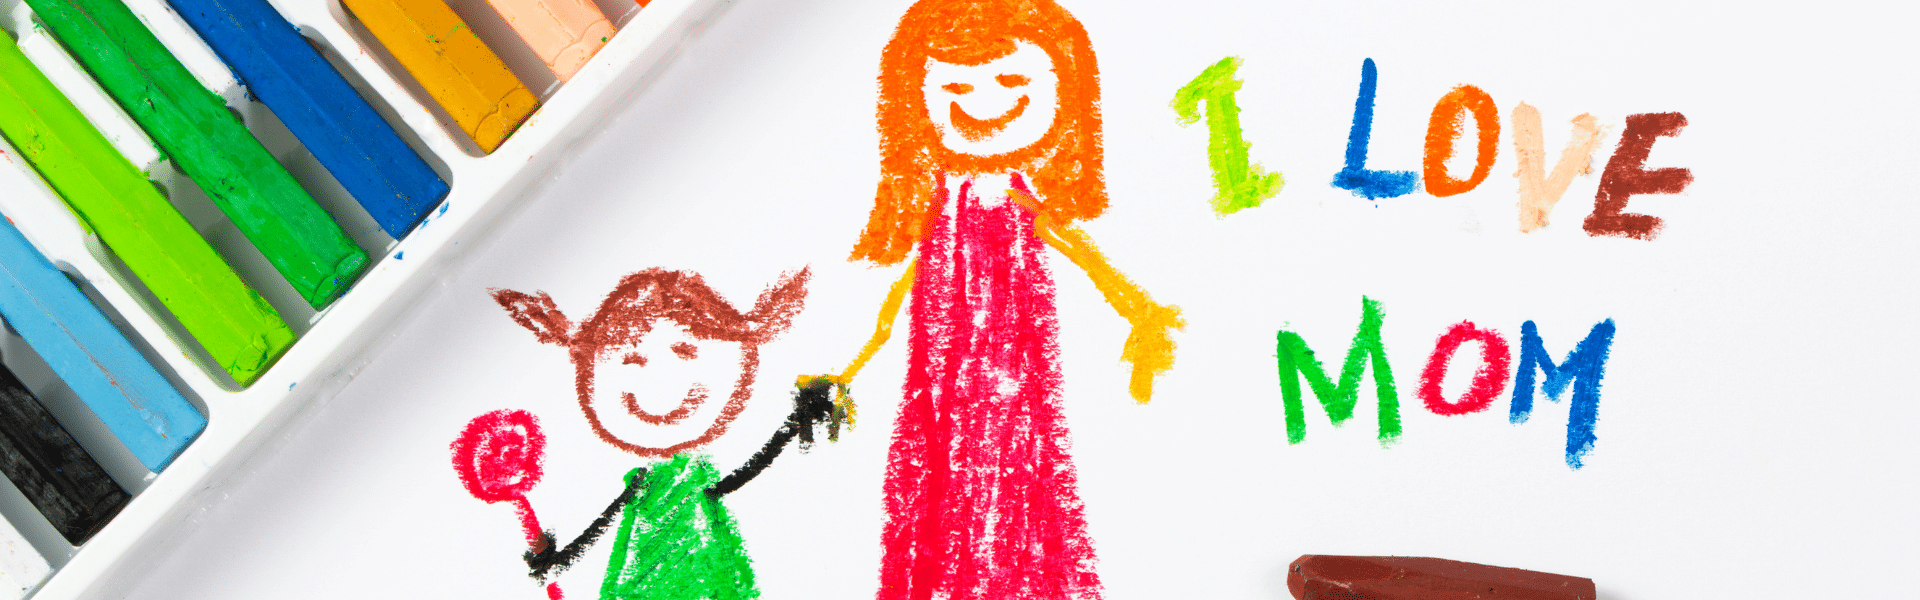 Kid's drawing of little girl and her mom